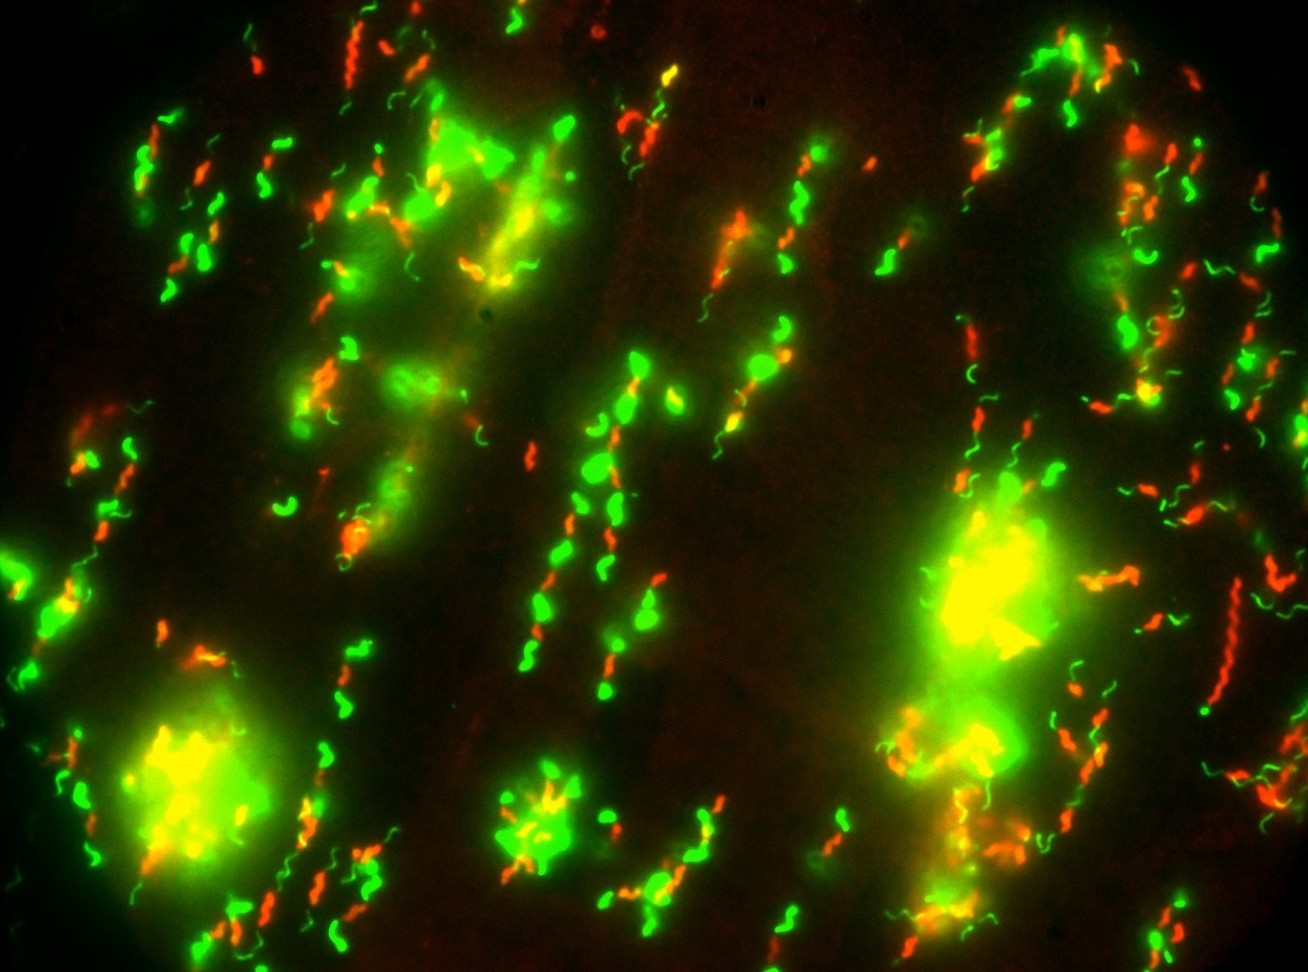 C. jejuni cells bodies (red) and flagella (green)